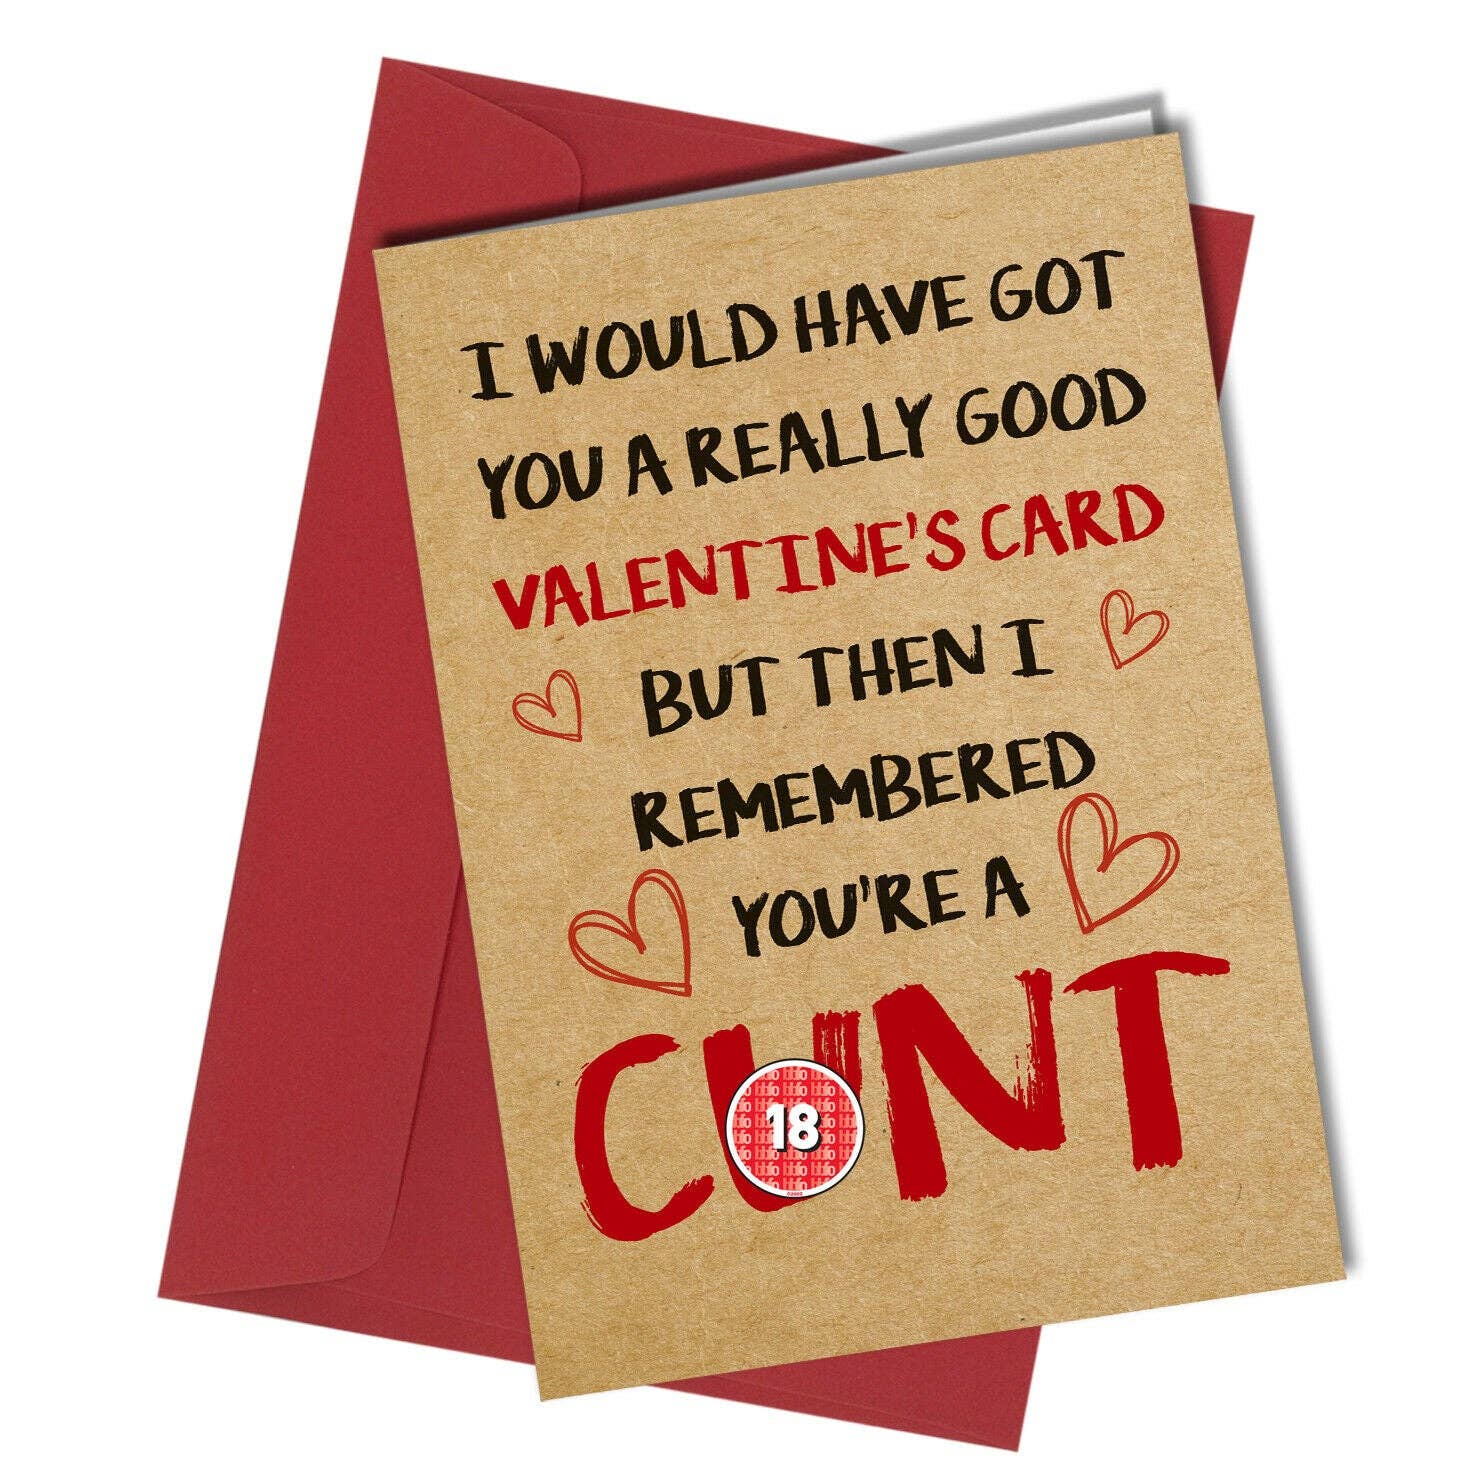 Cunt Close to the Bone Greeting Cards and Gifts